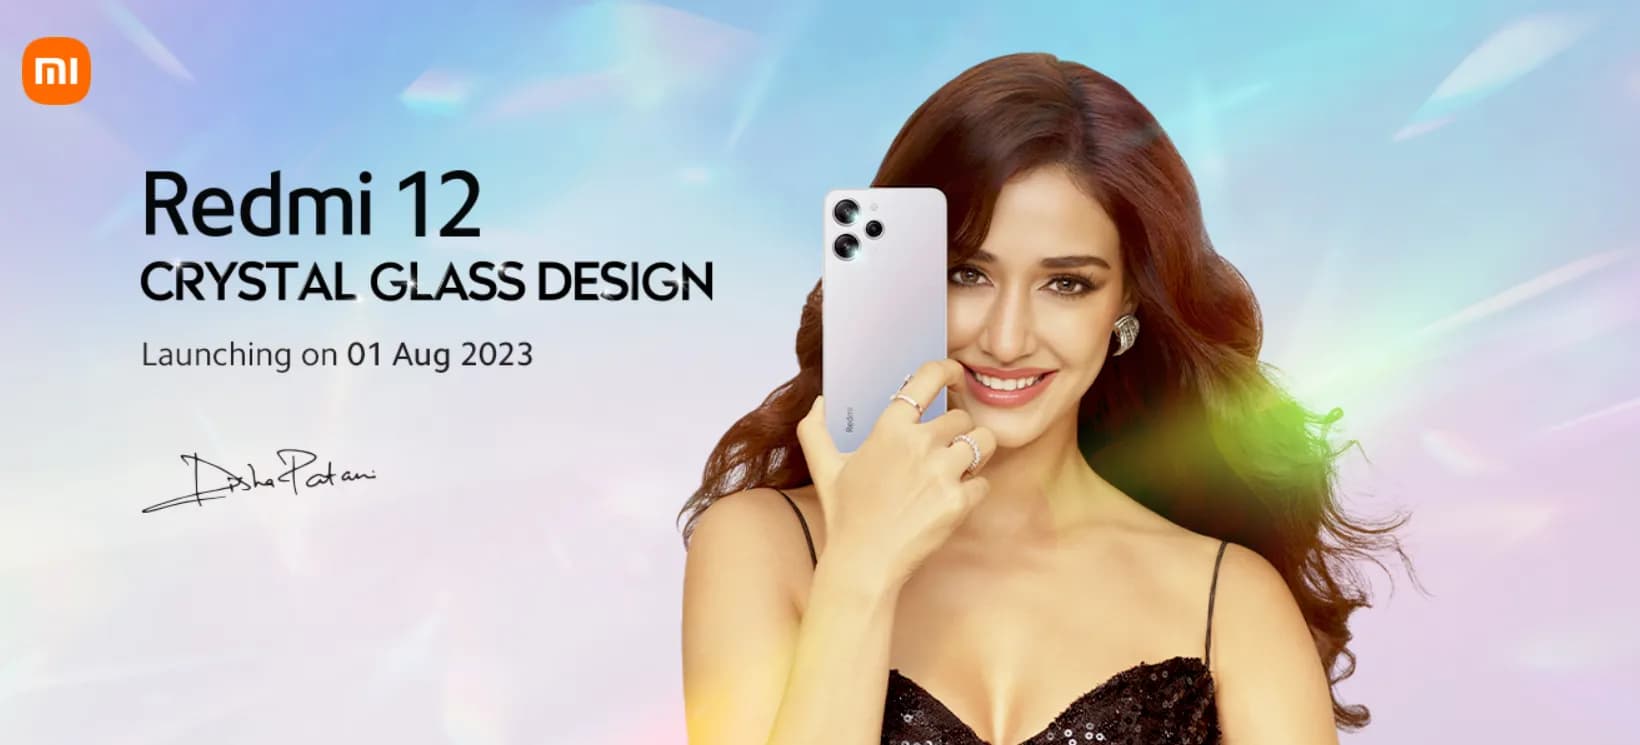 Redmi 12 Phone Sets to Be Launched on Amazon on August 1st